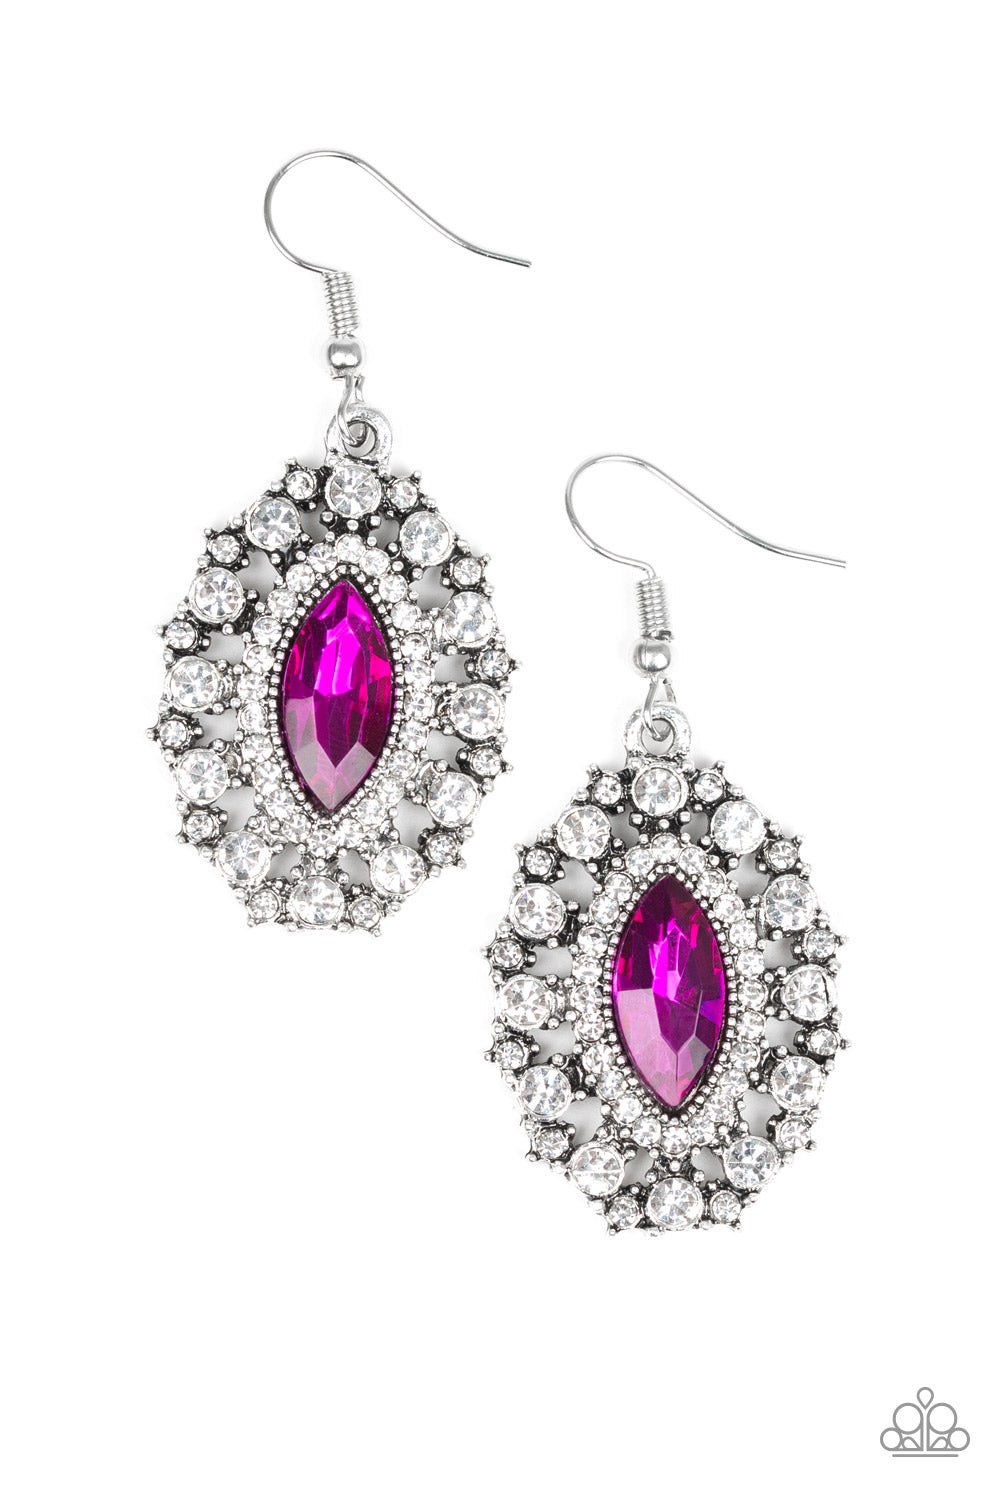 LONG MAY SHE REIGN - PINK MARQUISE HOT PINK RHINSTONE CLEAR RHINESTONES EARRINGS